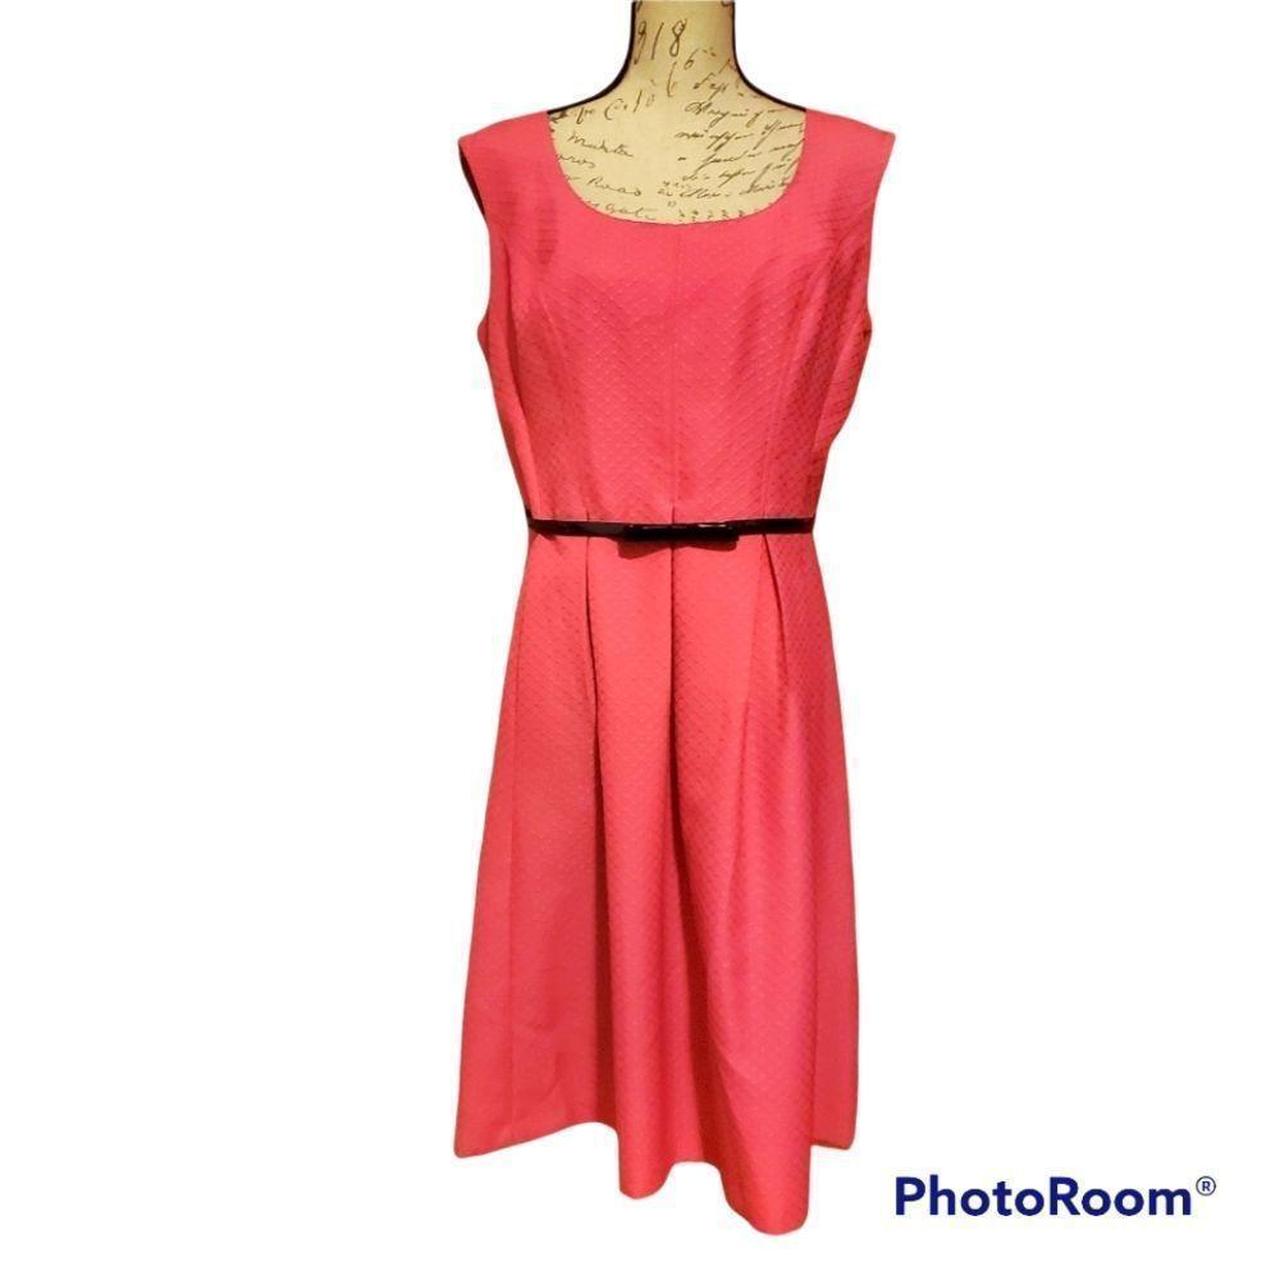 Product Image 1 - Belted patent bow dress. Textured